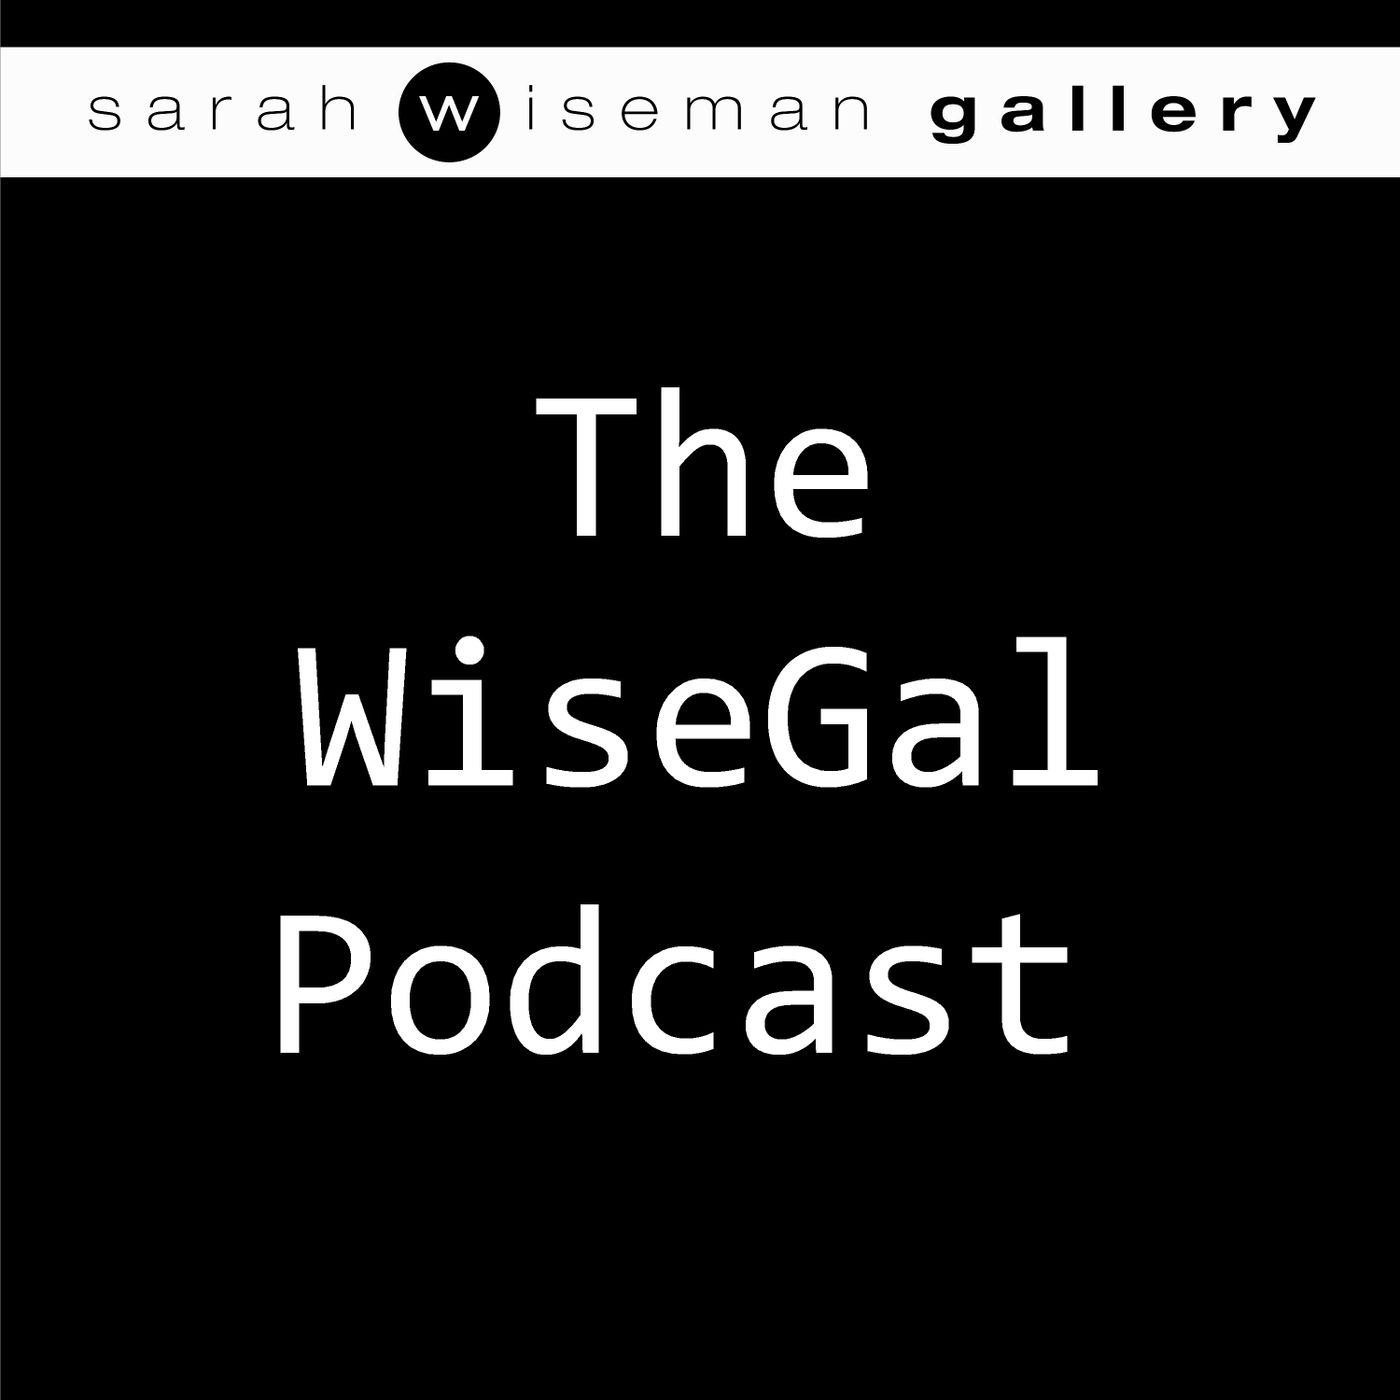 WiseGal from the Sarah Wiseman Gallery